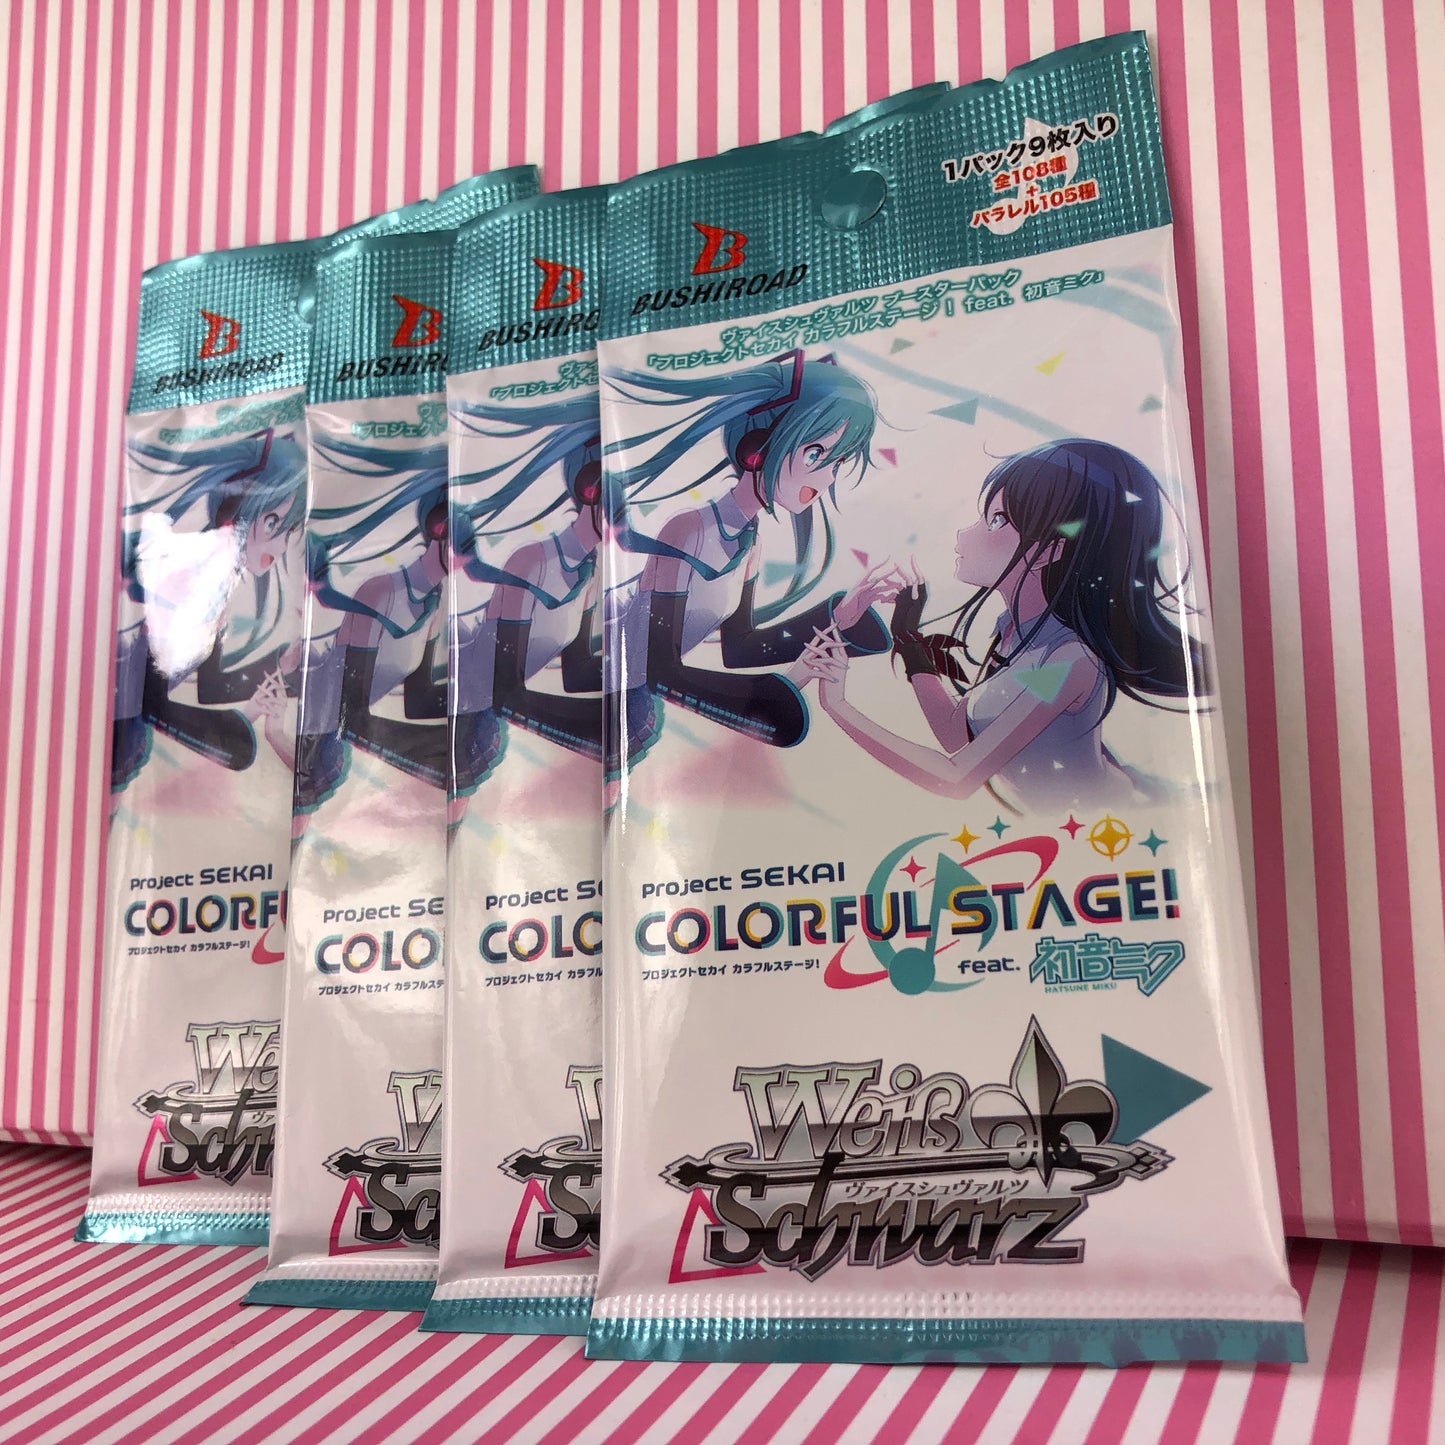 Booster Pack Expansion Pack Weib Weiss Schwarz Project Sekai Colorful Stage! ft. Hatsune Miku (1 Unit)